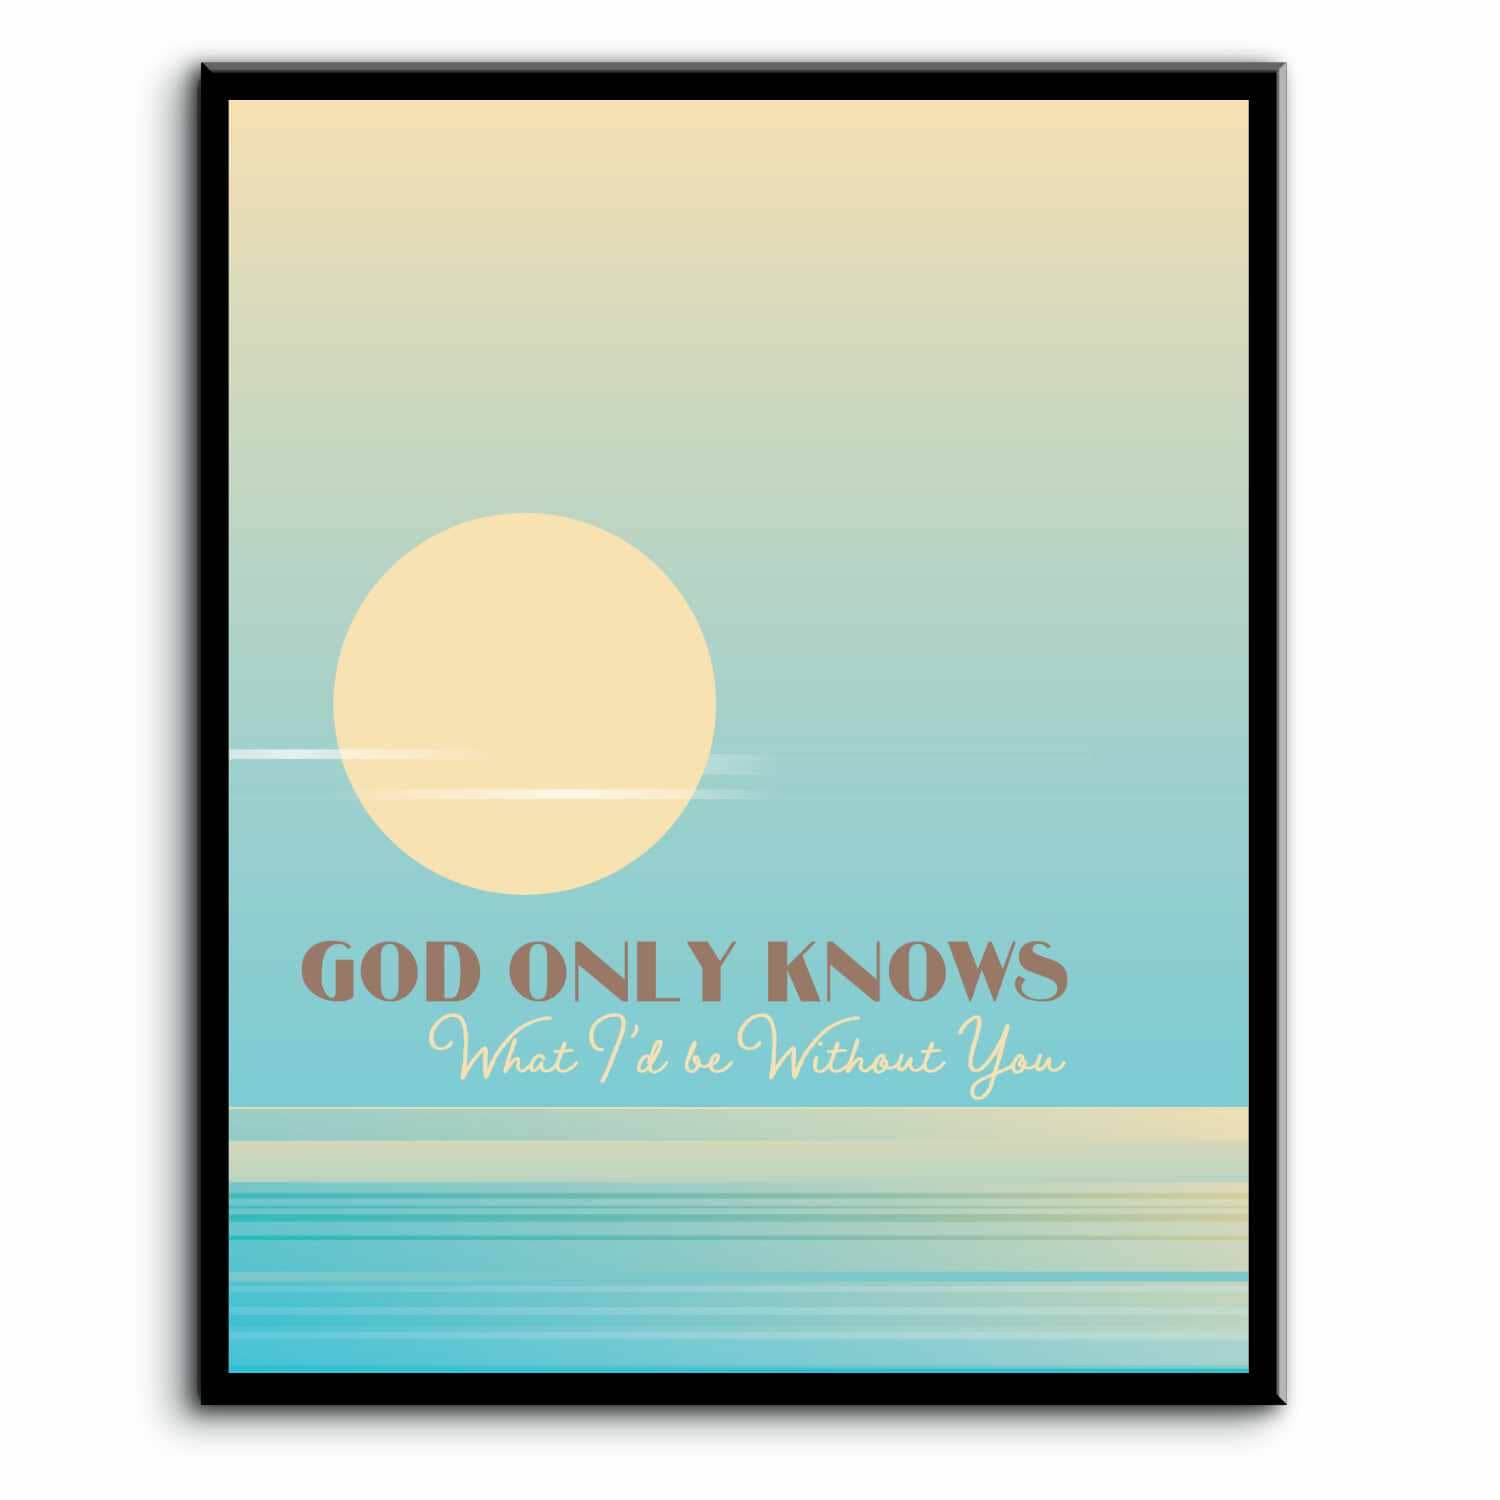 God Only Knows by the Beach Boys - Song Lyric Wall Art Song Lyrics Art Song Lyrics Art 8x10 Plaque Mount 